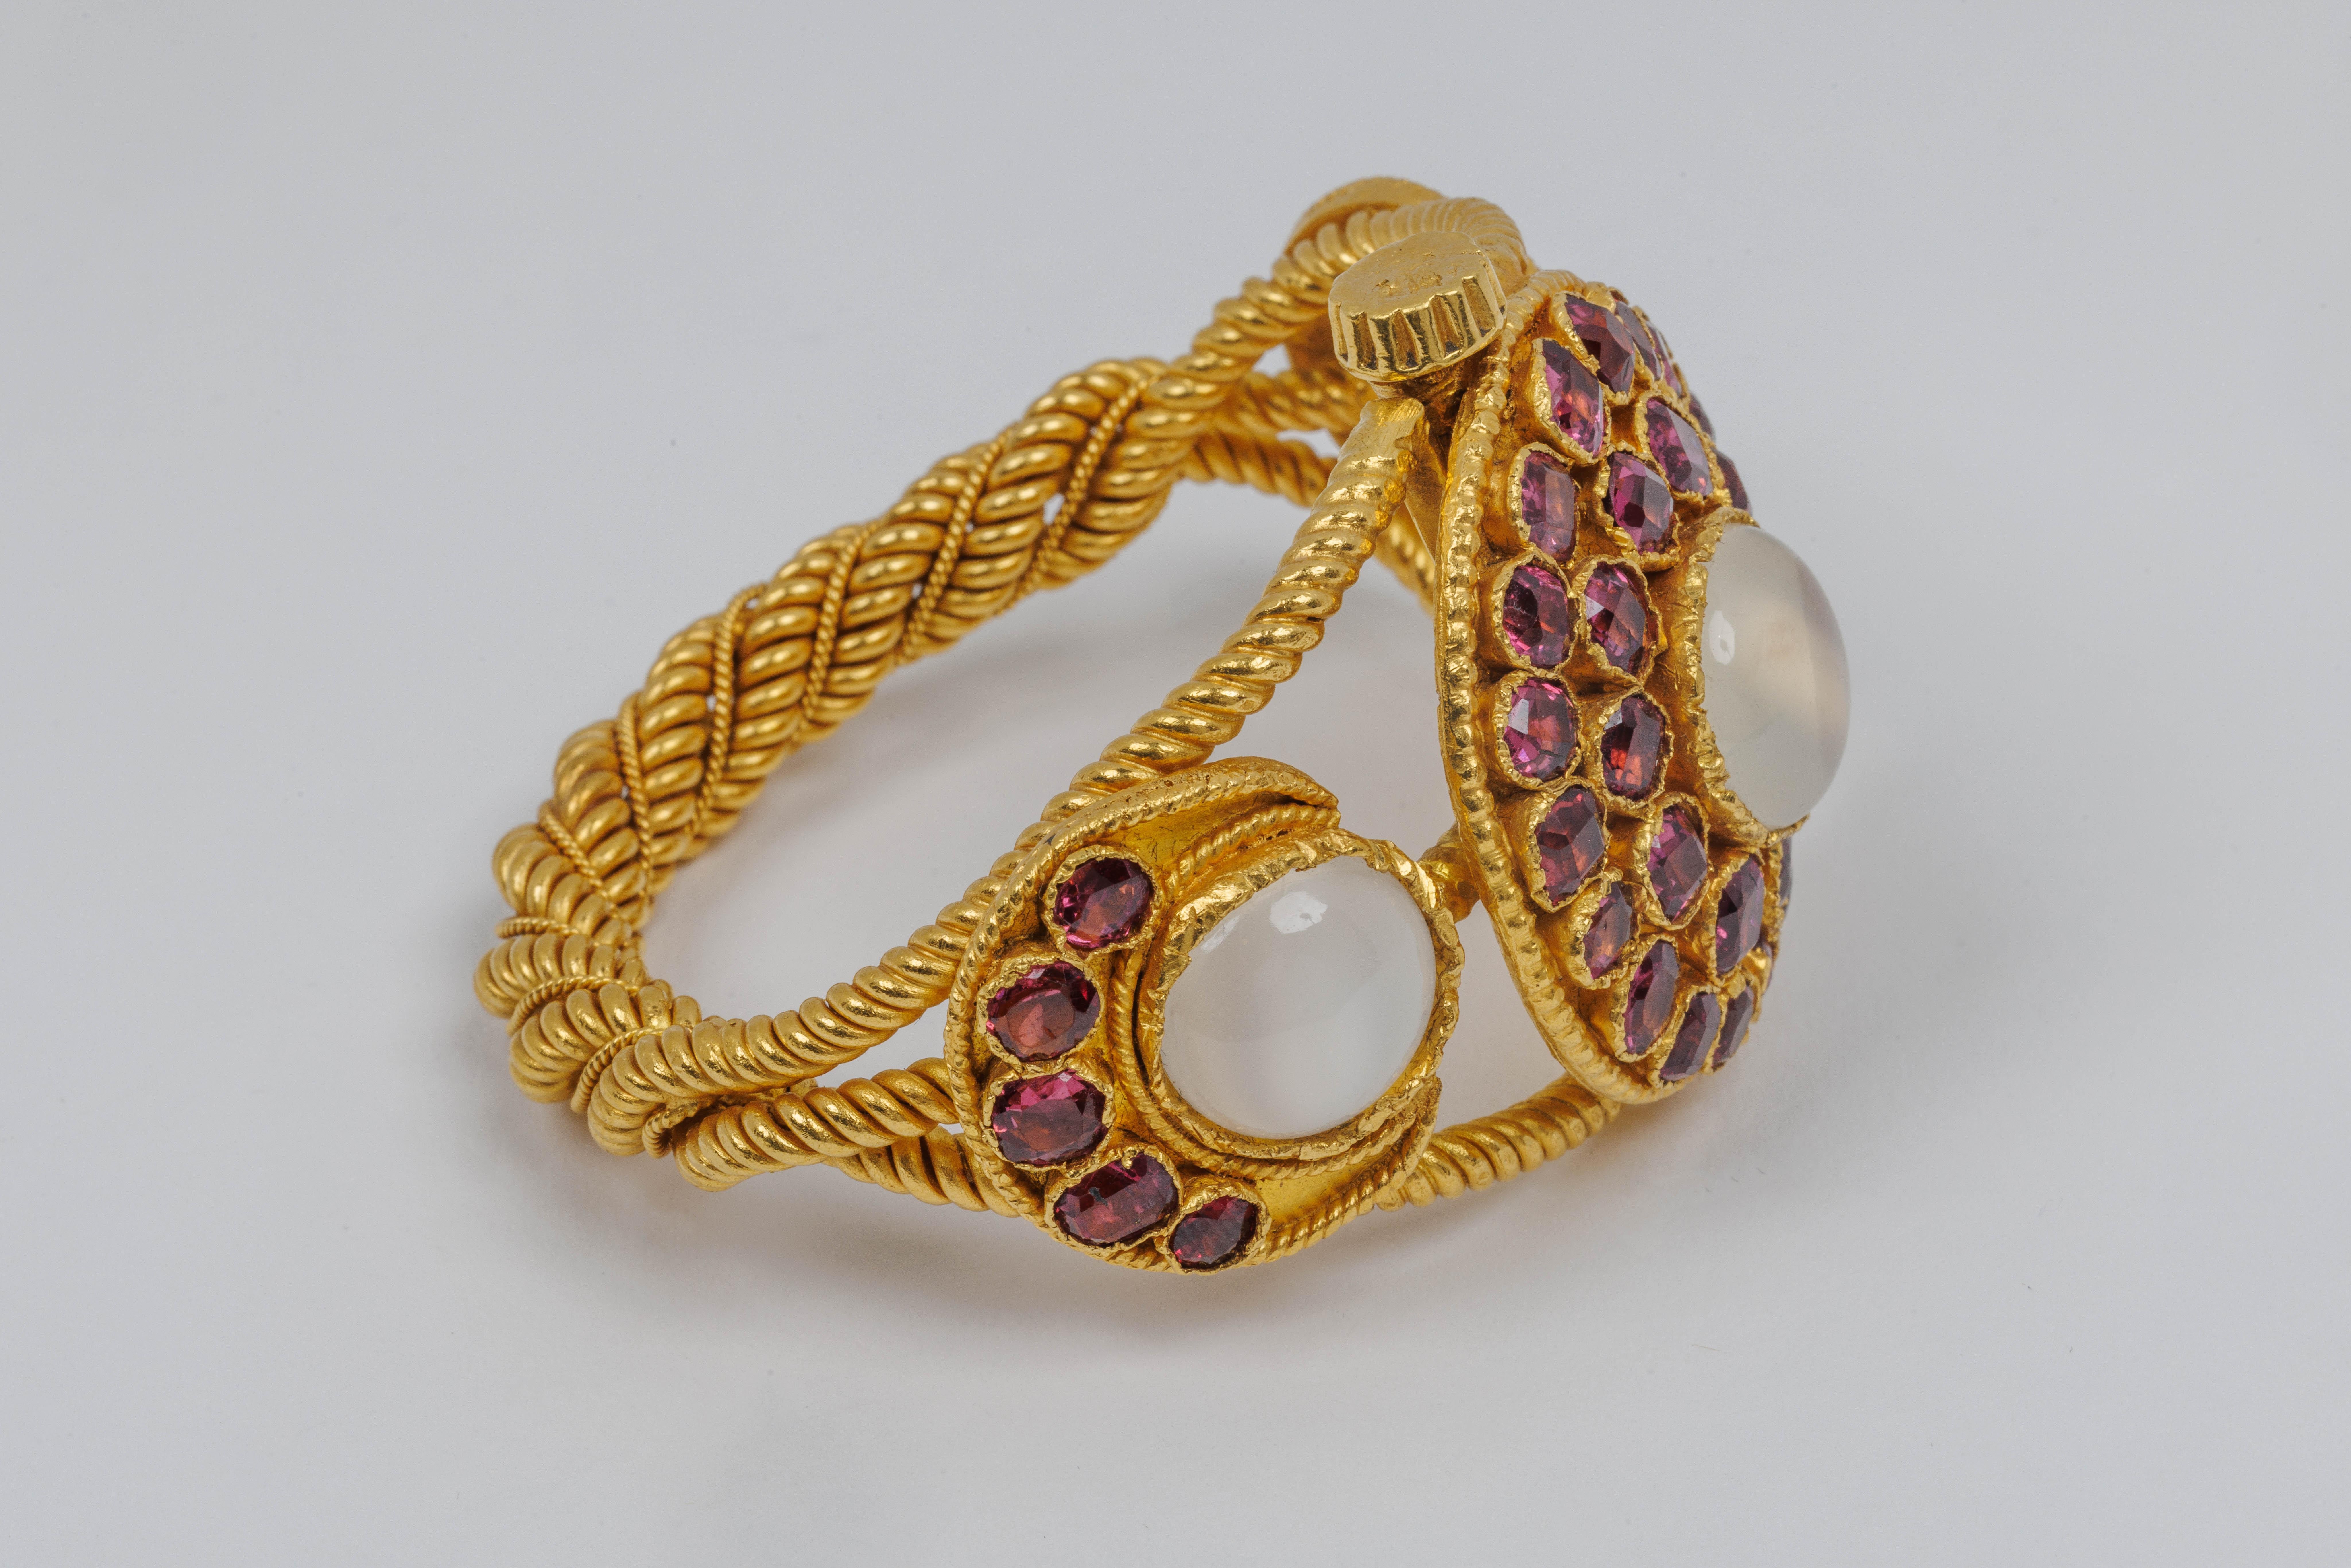 Cabochon 24k Yellow Gold Heavy Moonstone and Garnet Statement Bangle Bracelet  For Sale